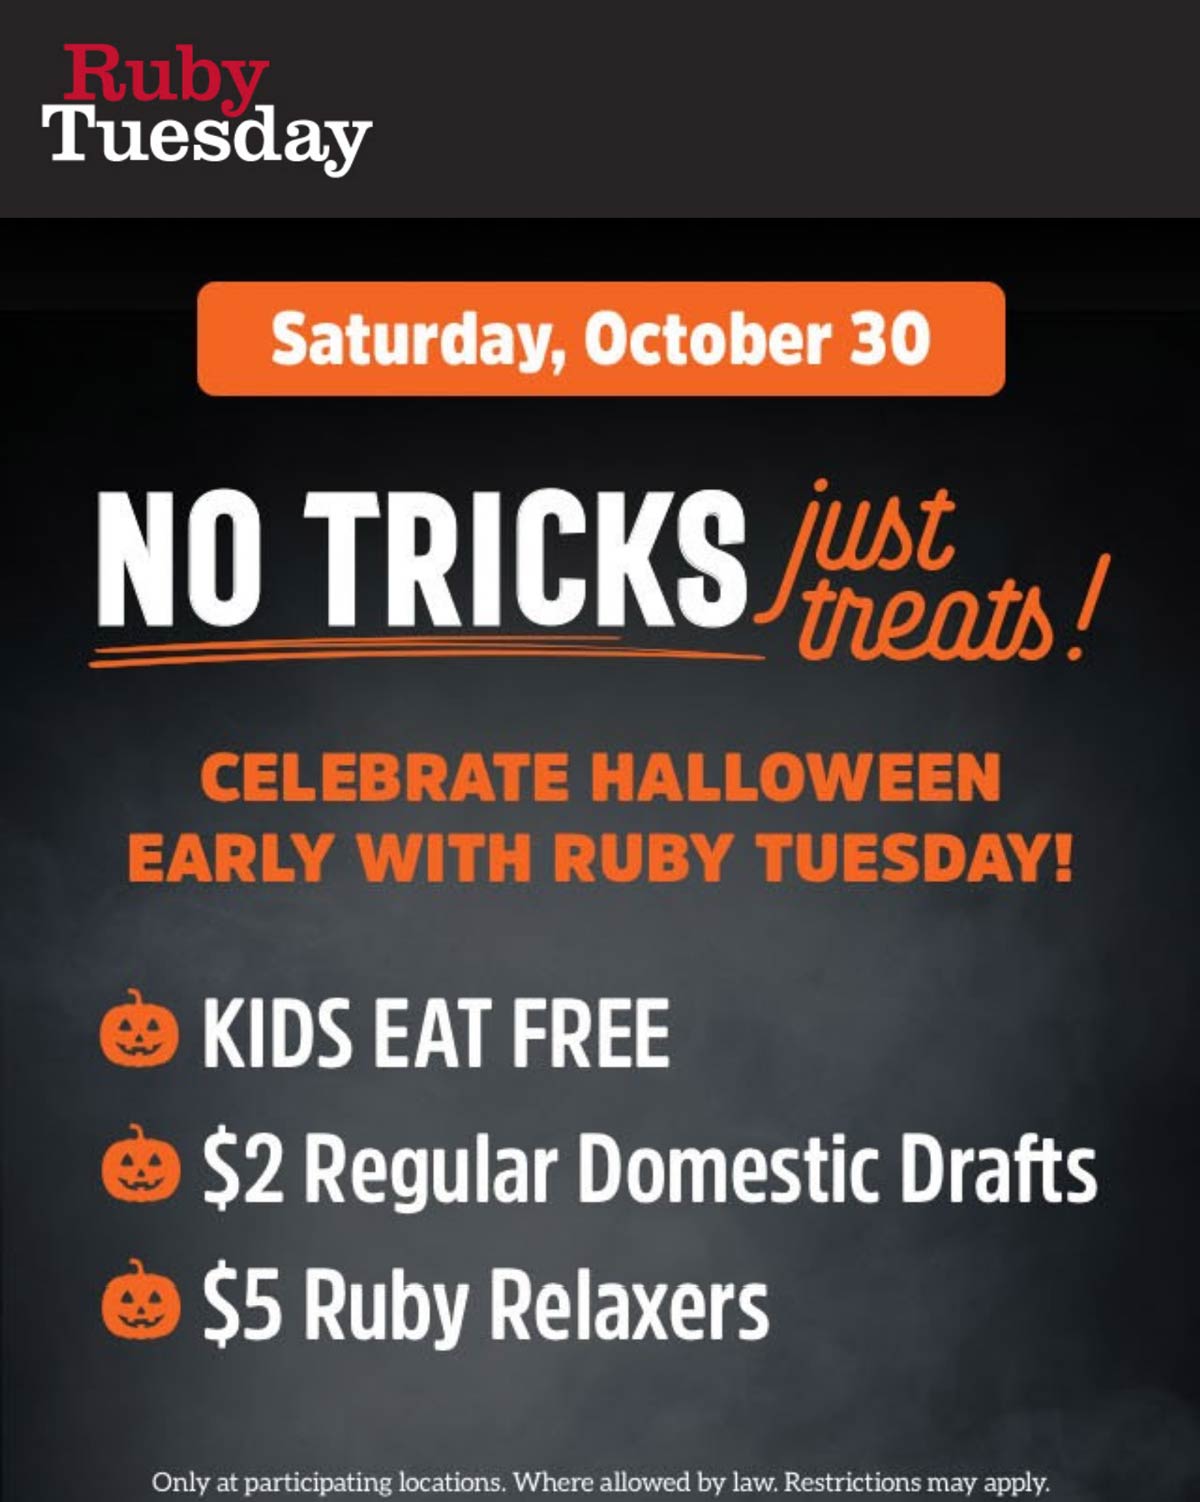 Ruby Tuesday restaurants Coupon  Kids eat free & $2 draft beer today at Ruby Tuesday #rubytuesday 